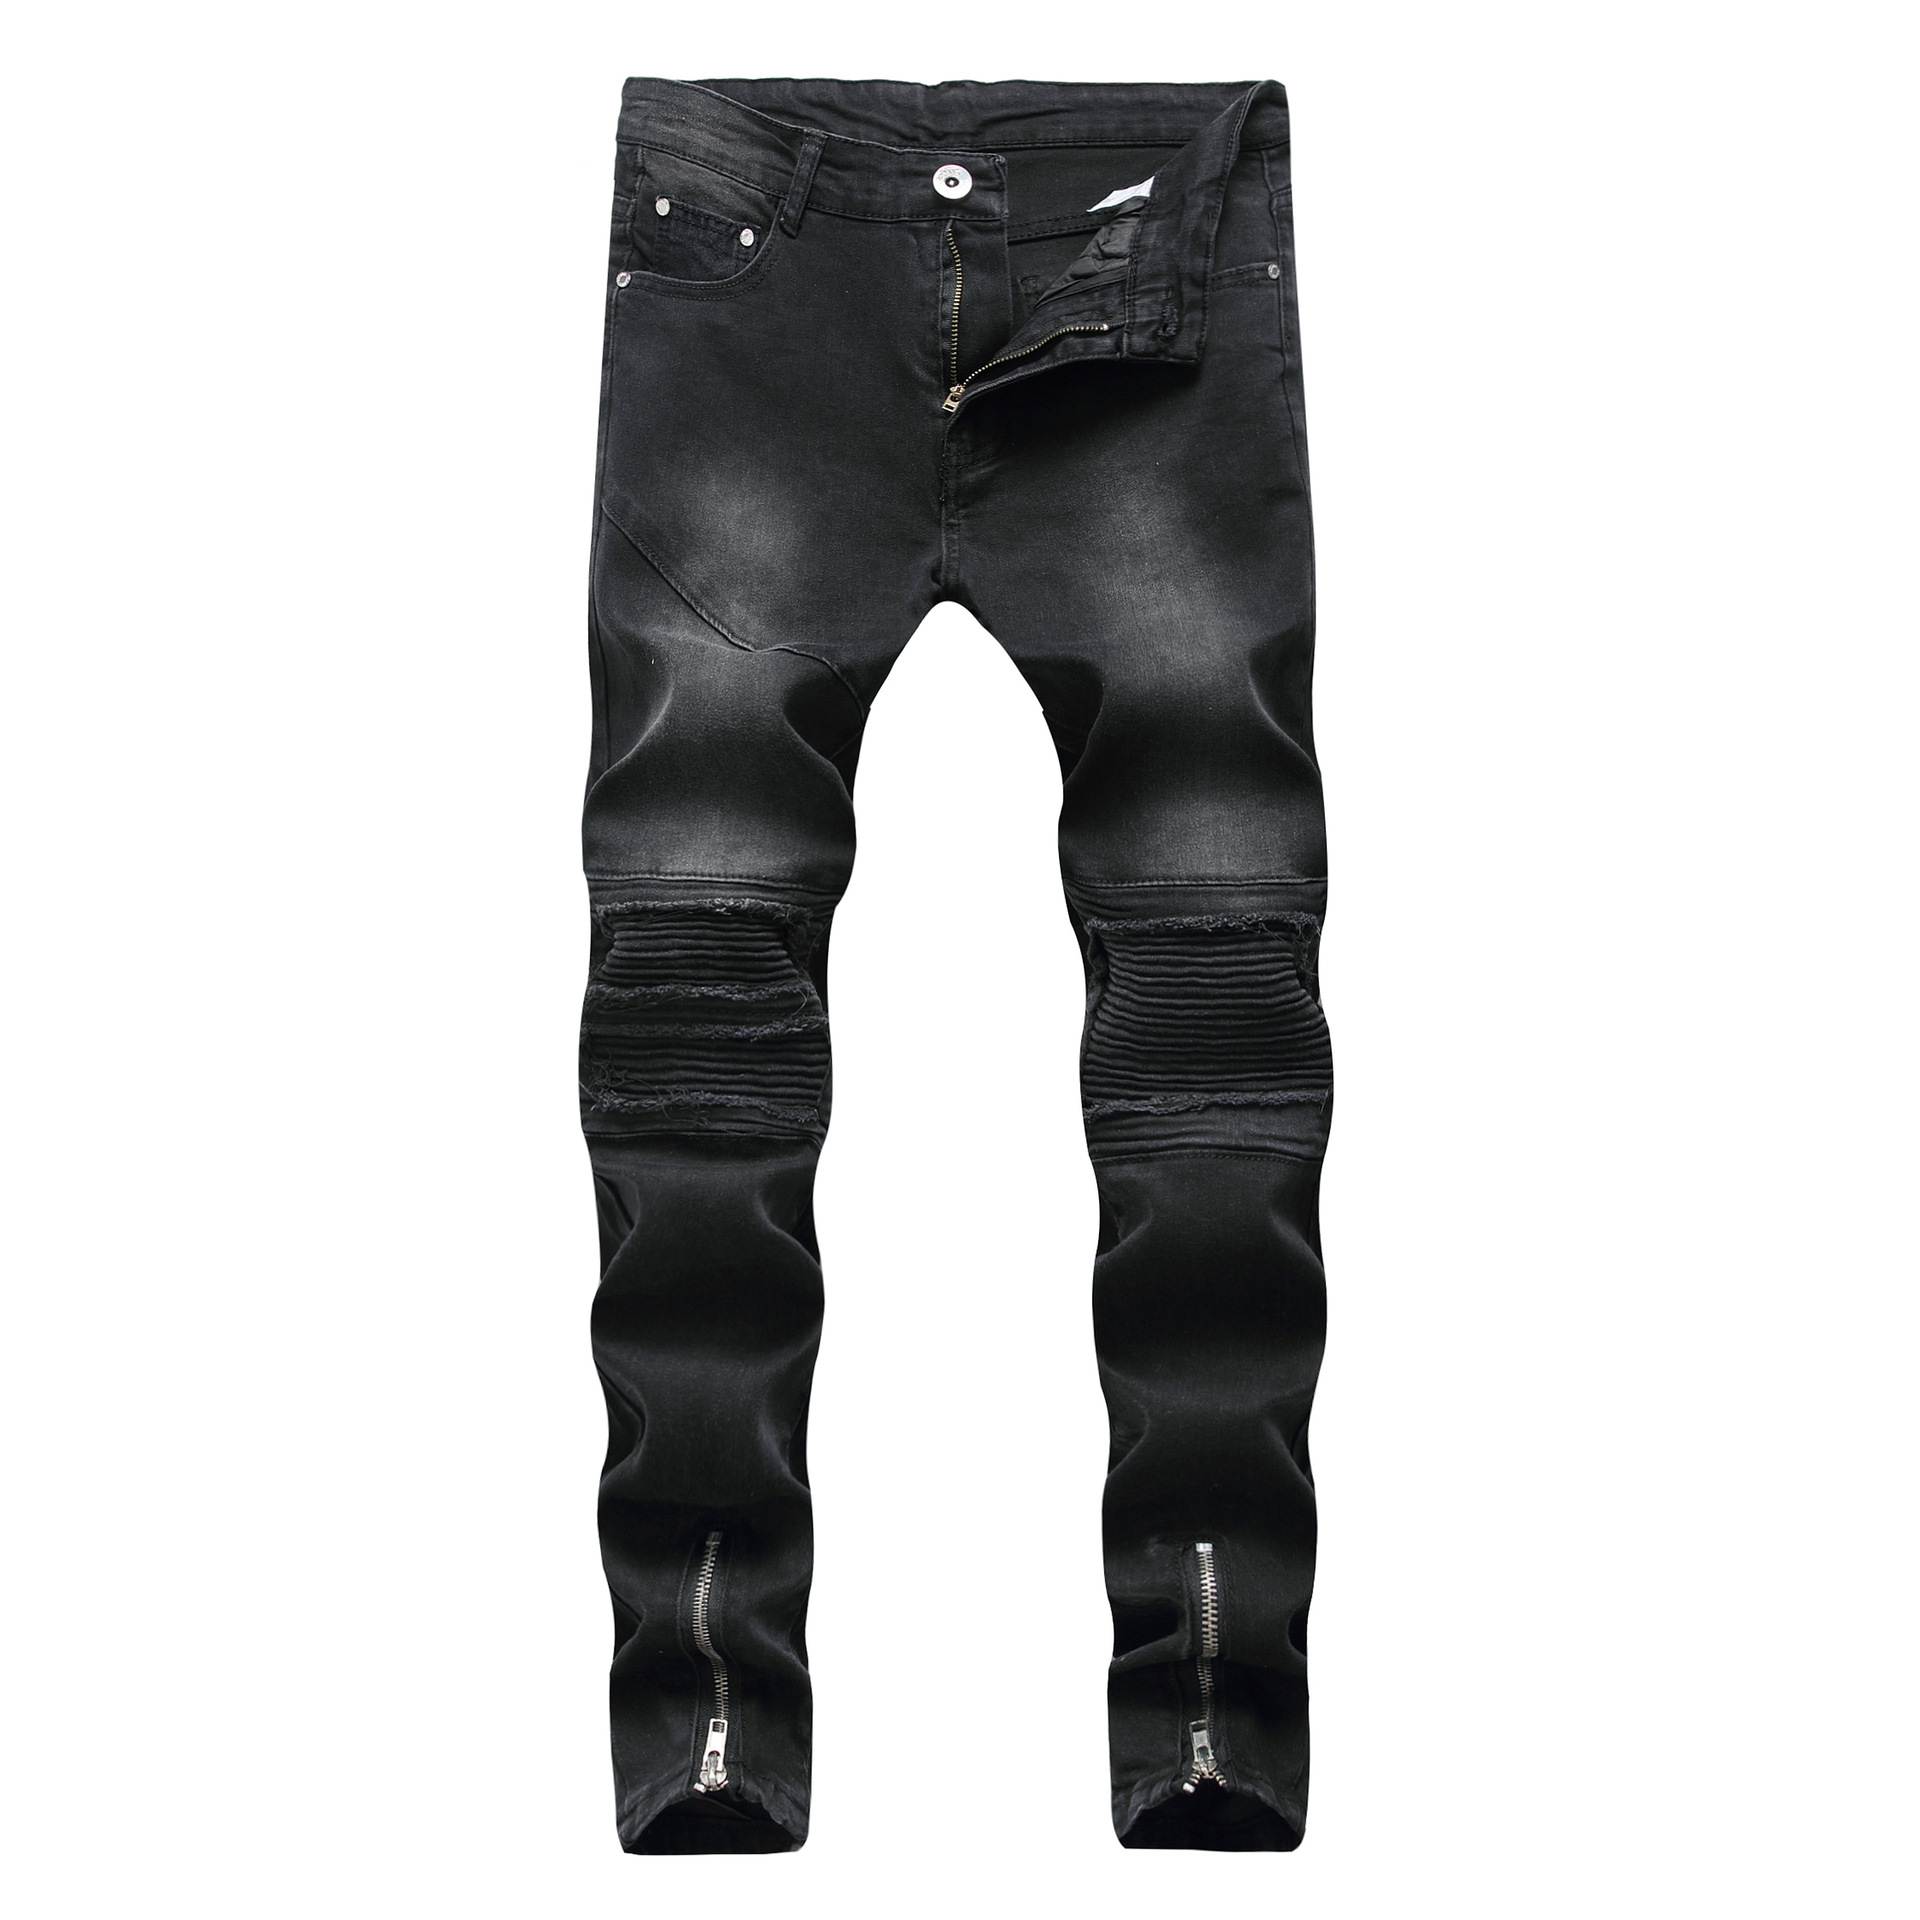 

Men's Jeans CLEARANCE SALE Man Male Ripped Draped Biker Knee Pleated Ankle Zipper Brand Slim Fit Cut Destroyed Skinny Jean Casual Fashion Pants For Homme, 1842black 32